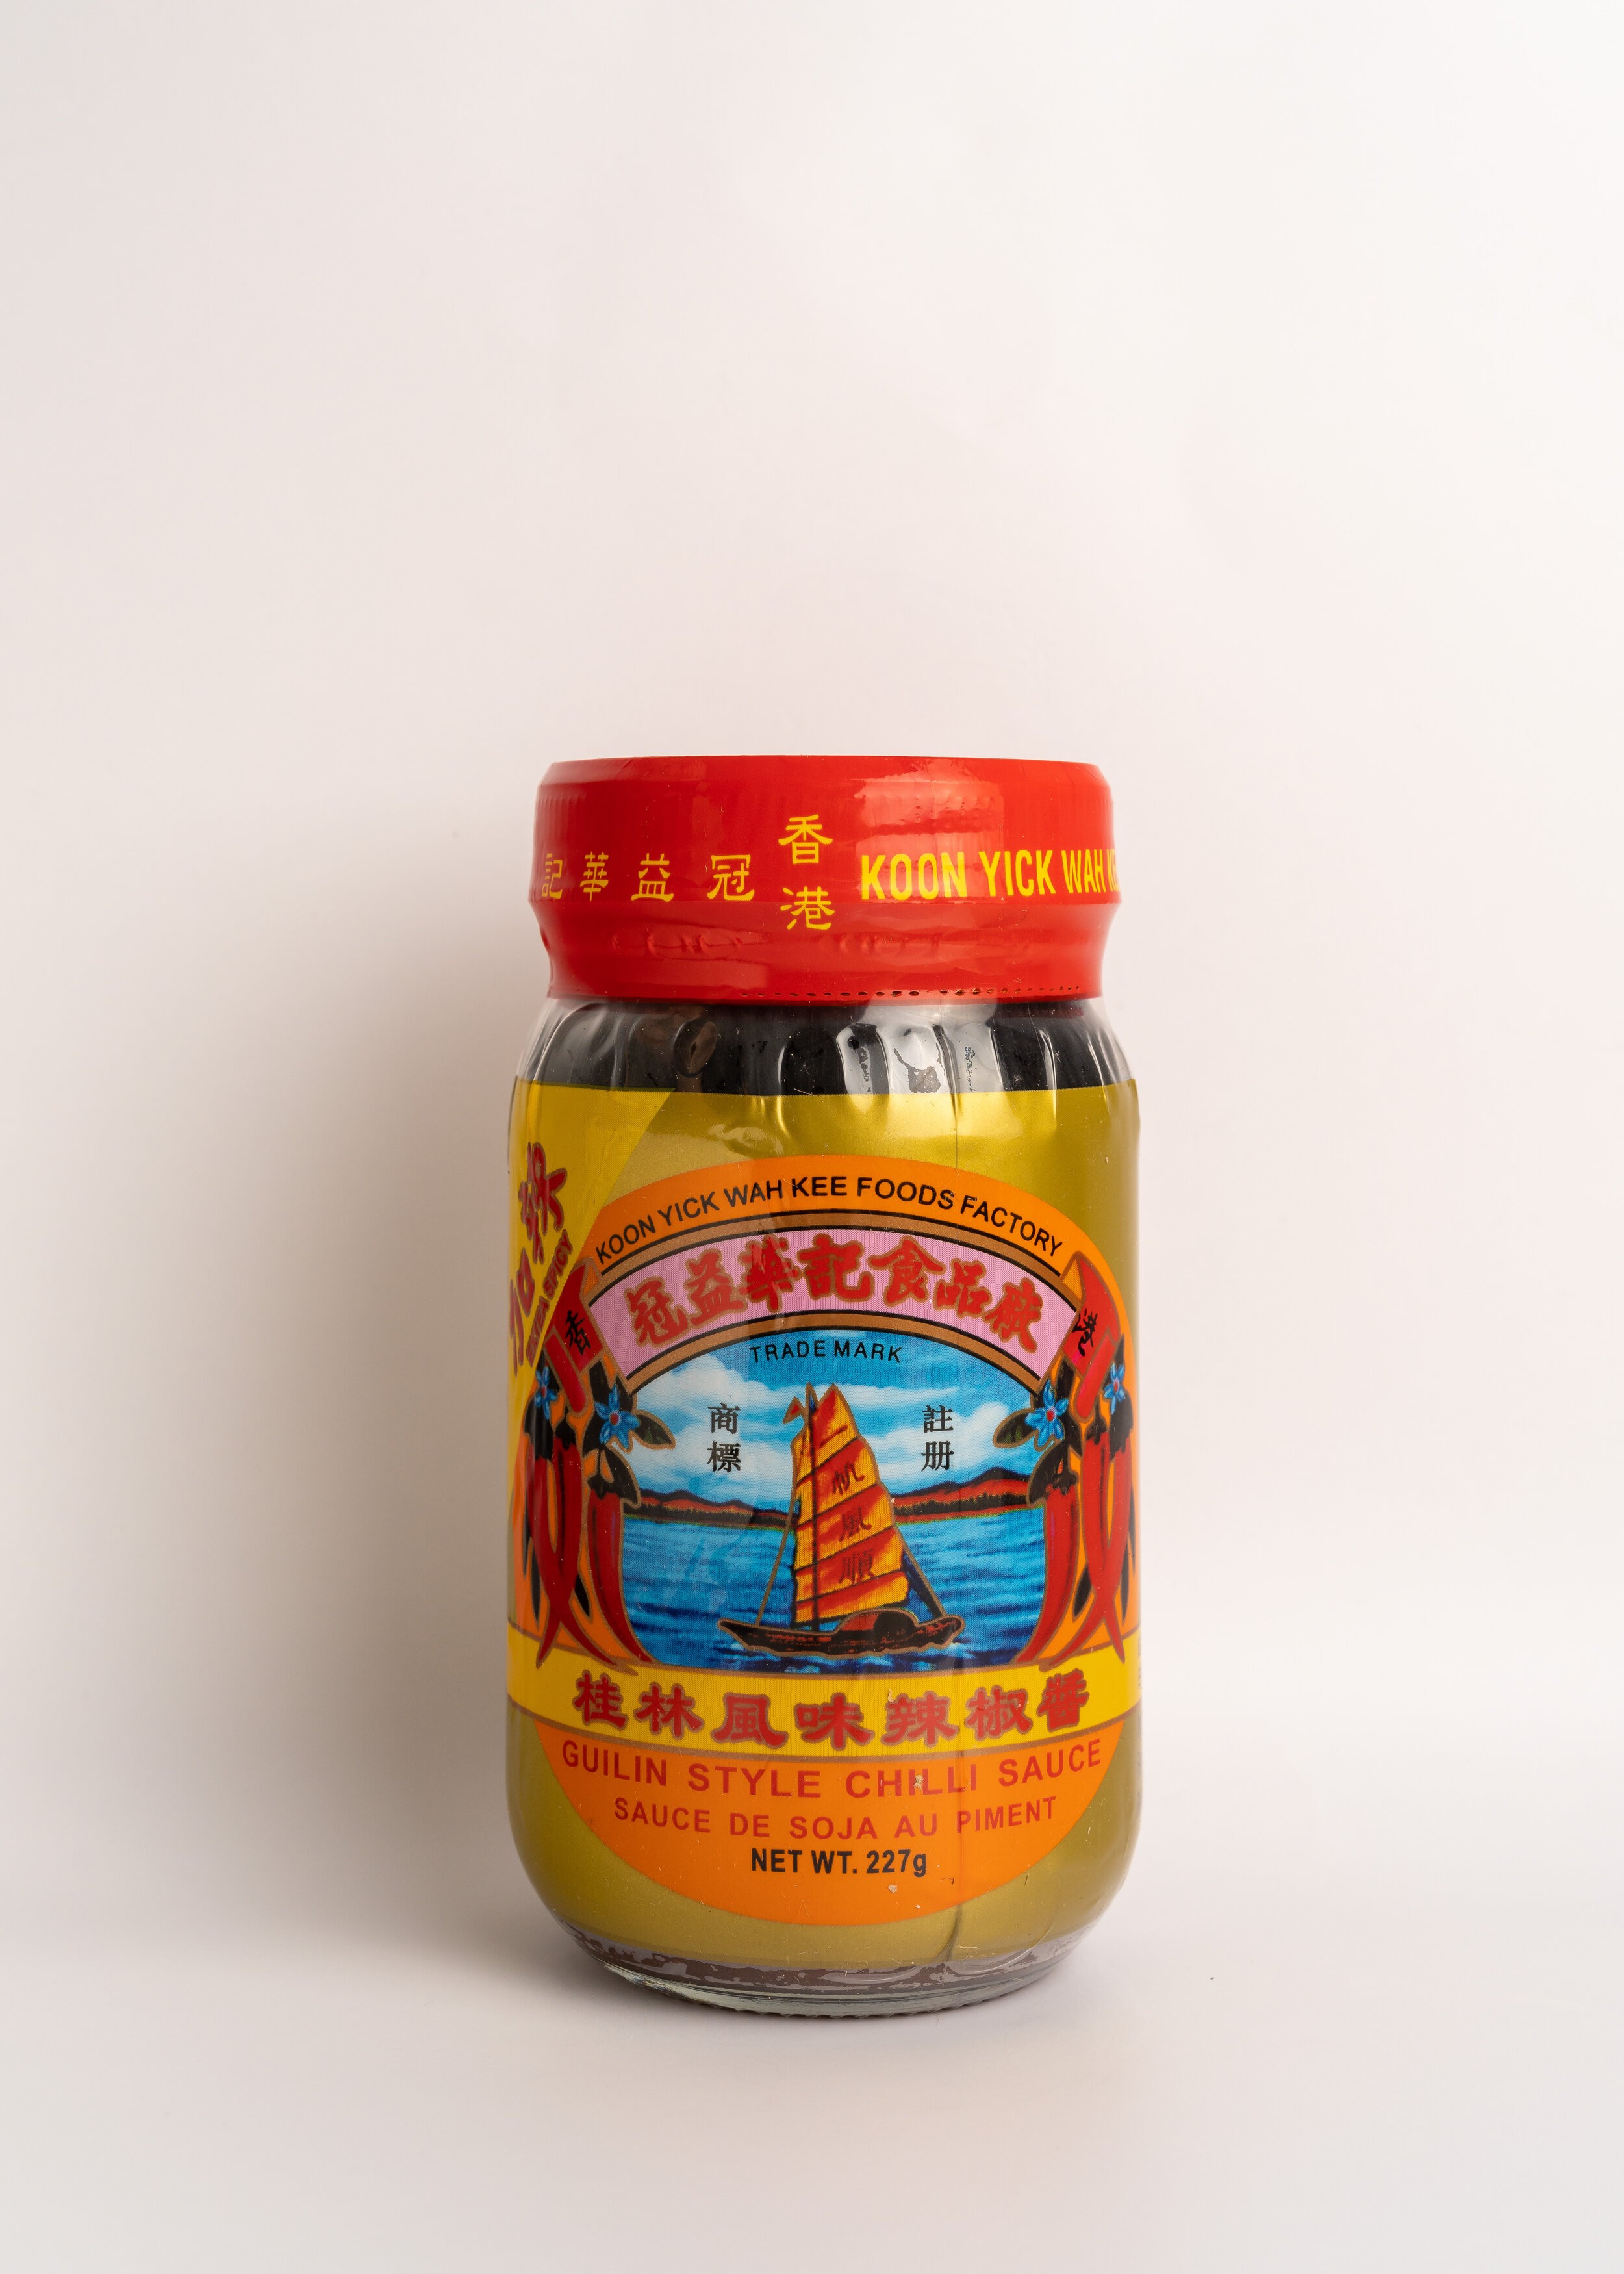 guilin-style-chilli-sauce